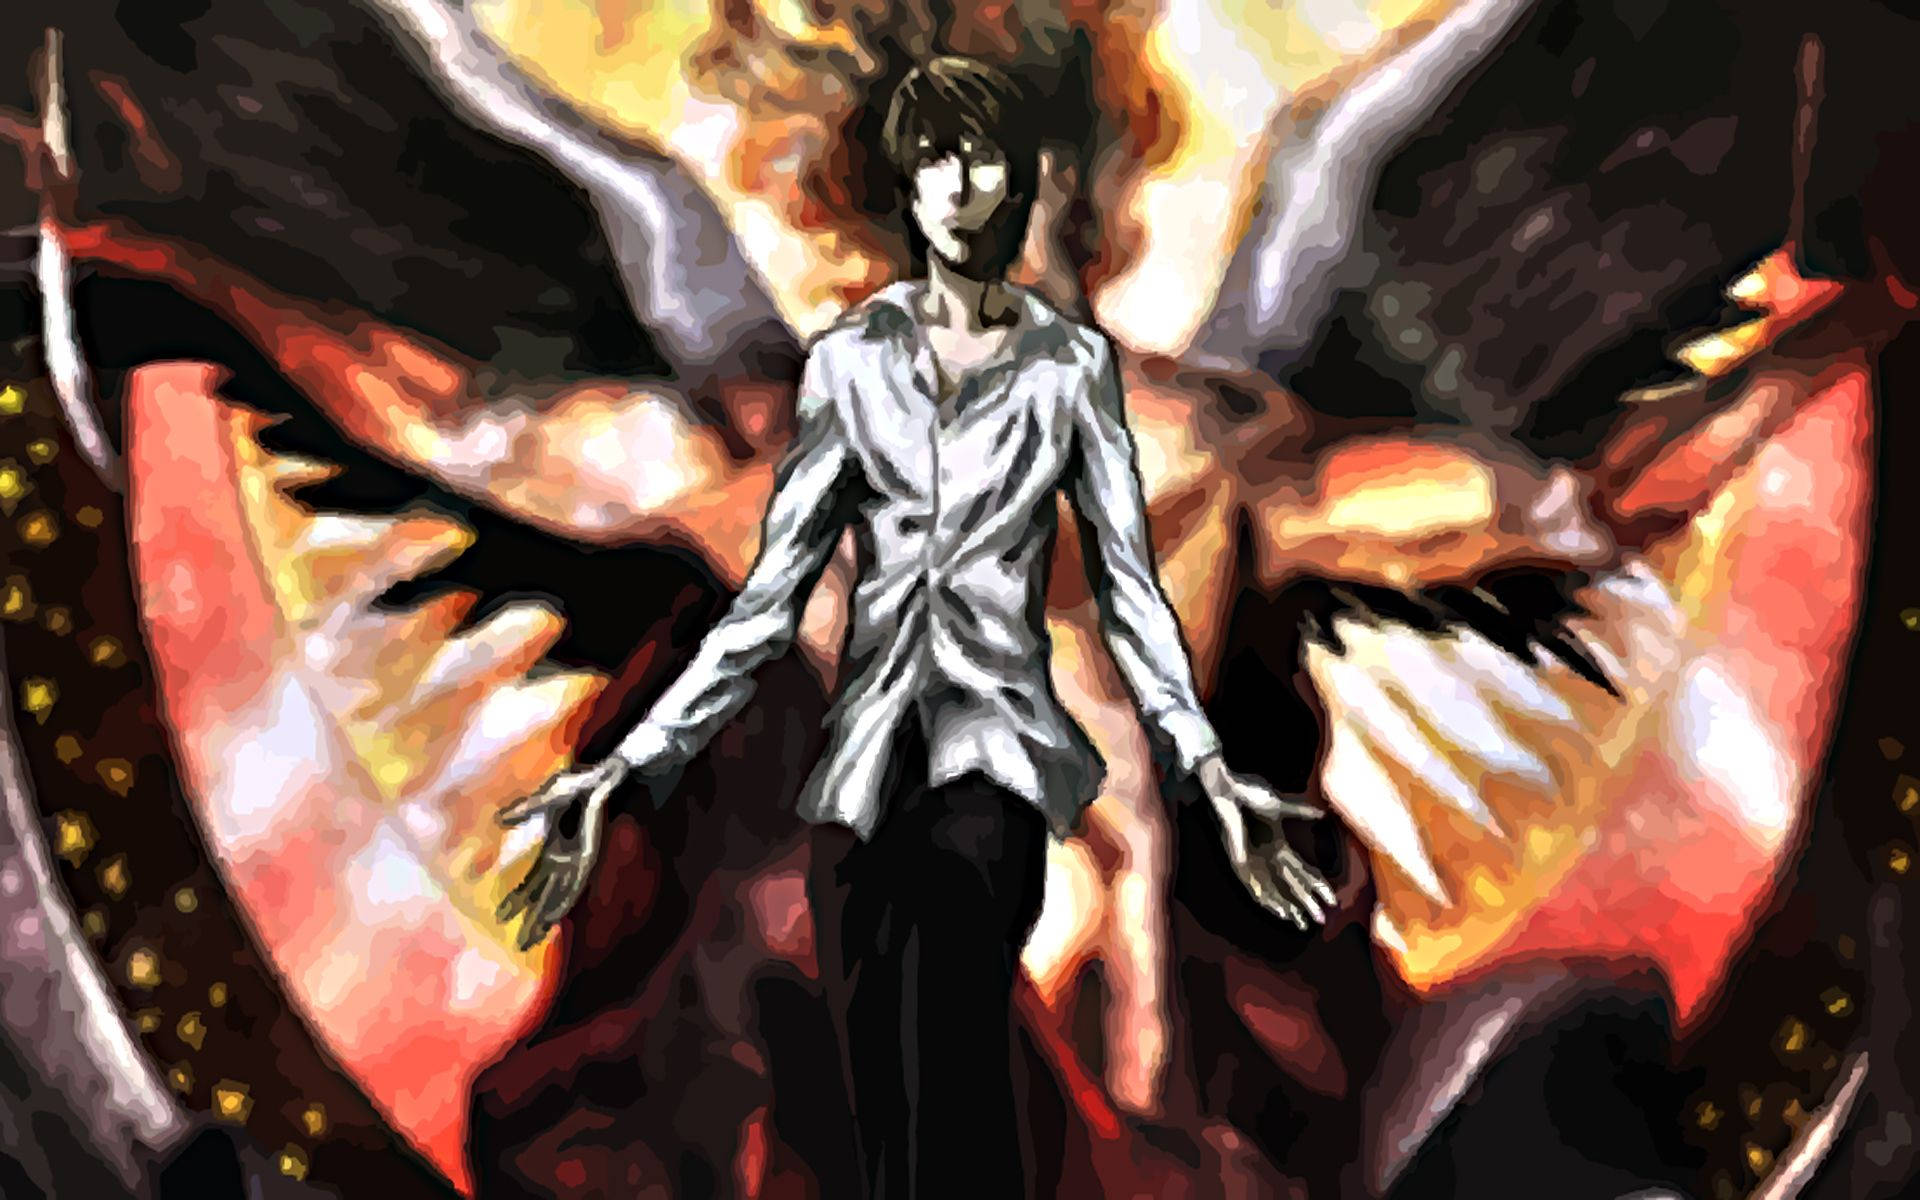 Light Yagami, formally known as the Vigilante ‘Kira’, writing in his Death Note Wallpaper